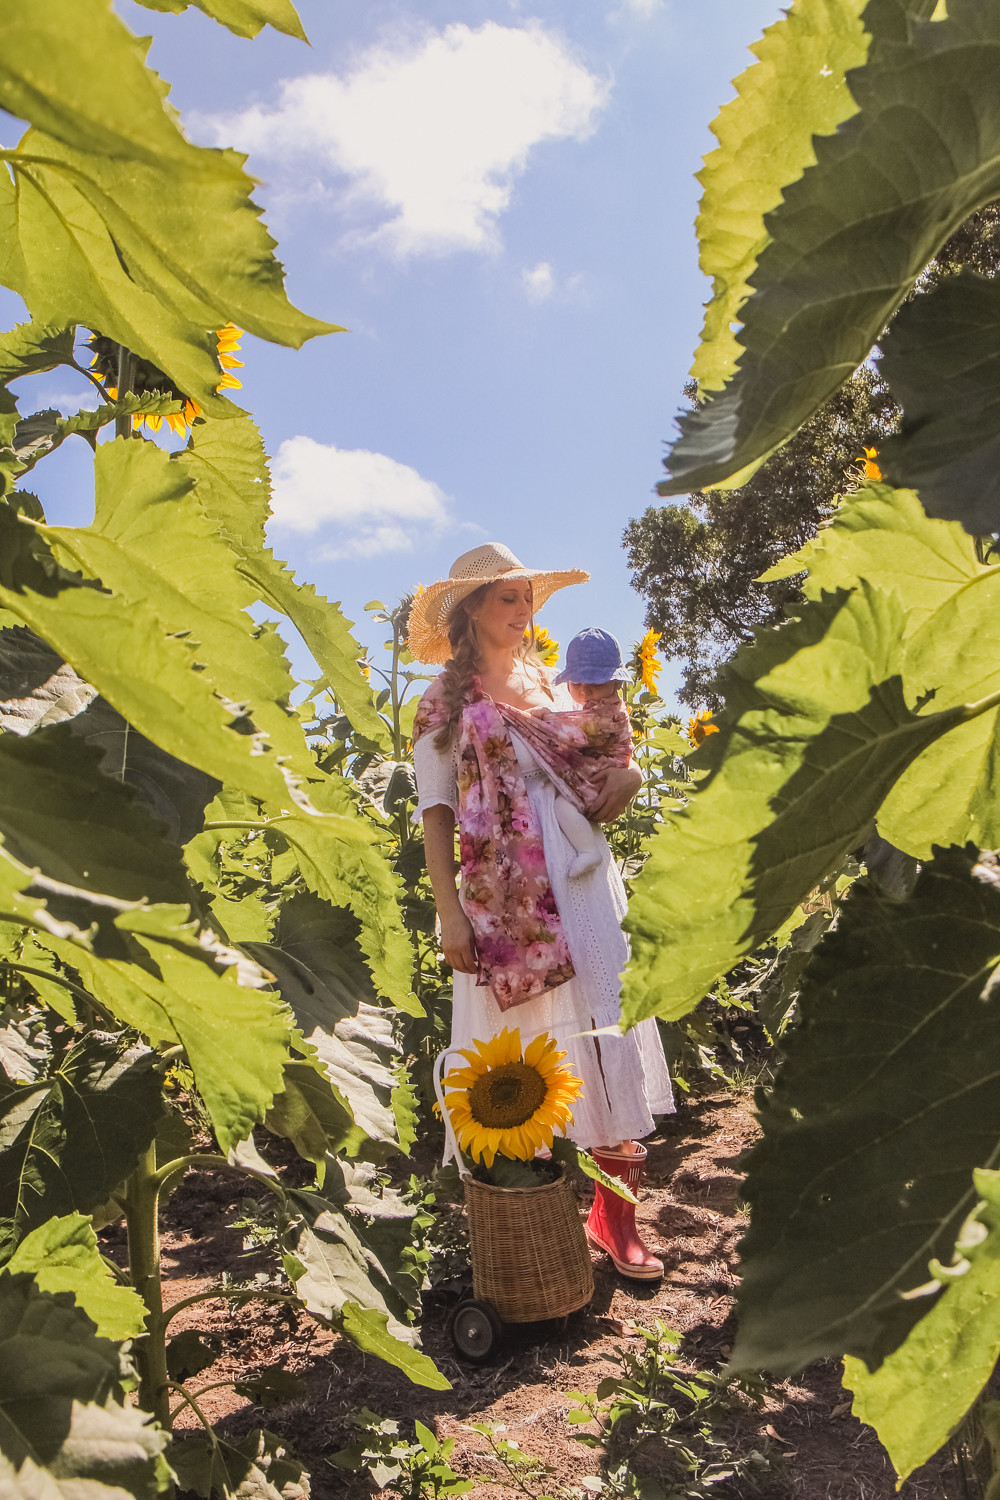 Goldfields Girl at sunflower farm in Ballarat in Victoria. Wearing white eyelet dress, straw hat and pink ring sling baby carrier pulling Olli Ella buggy filled with sunflowers